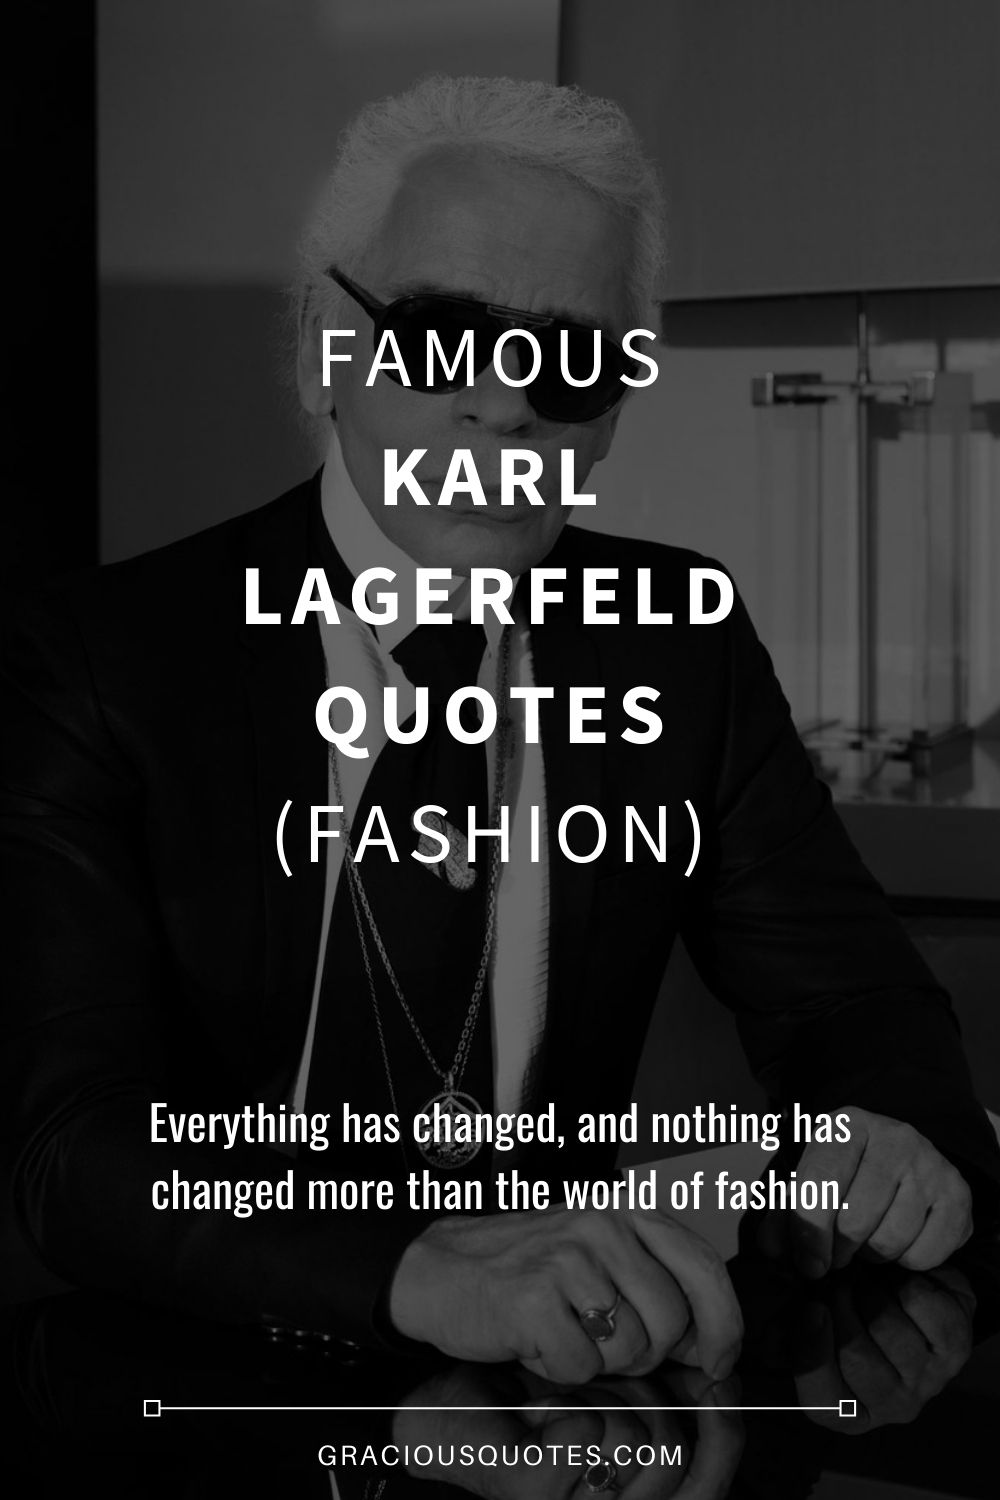 Famous Karl Lagerfeld Quotes (FASHION) - Gracious Quotes